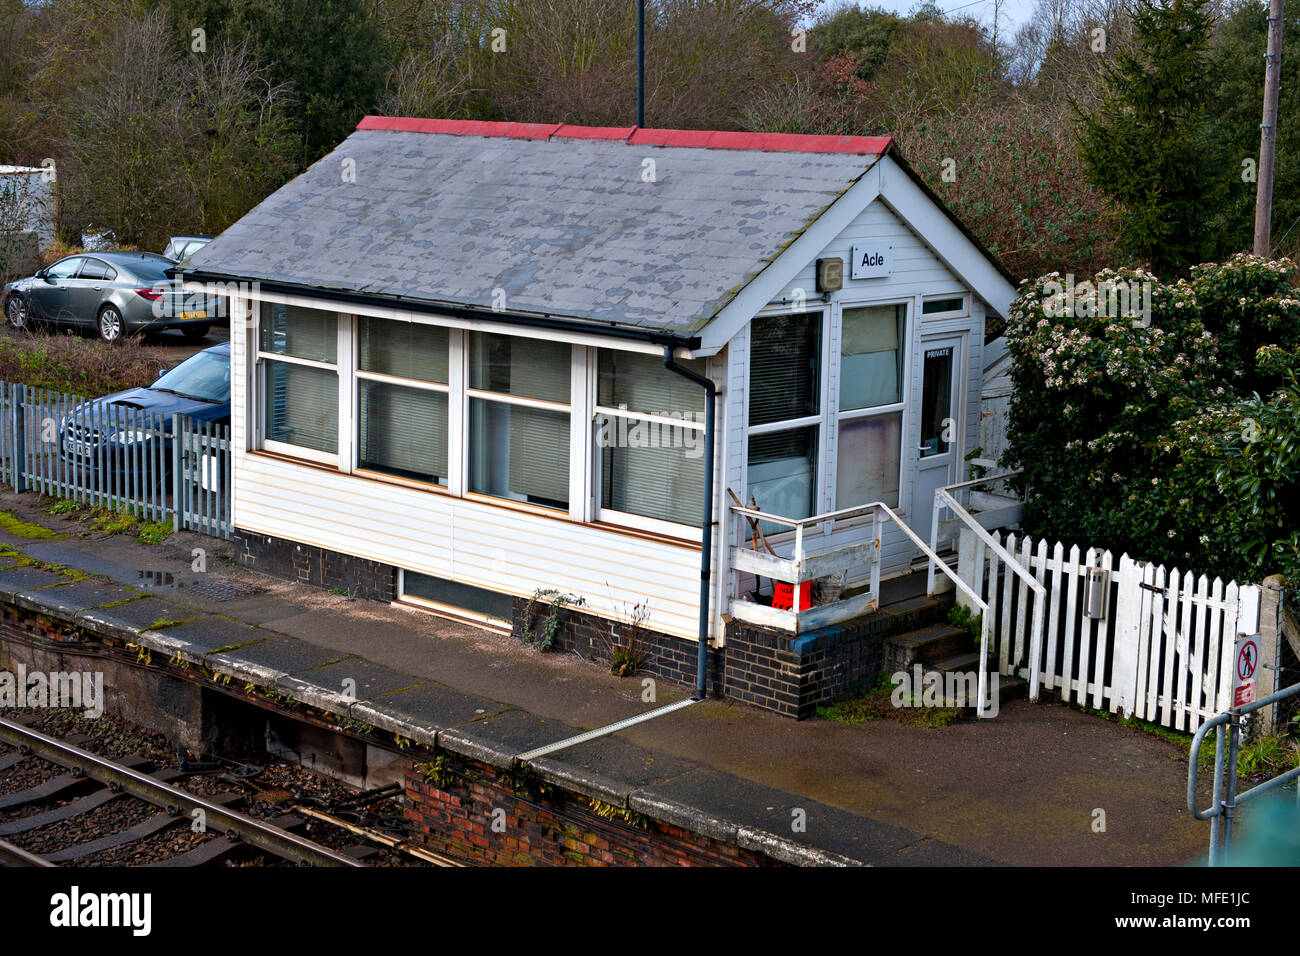 Acle railway station on the Wherry lines between Norwich and Great Yarmouth in Norfolk, UK Stock Photo